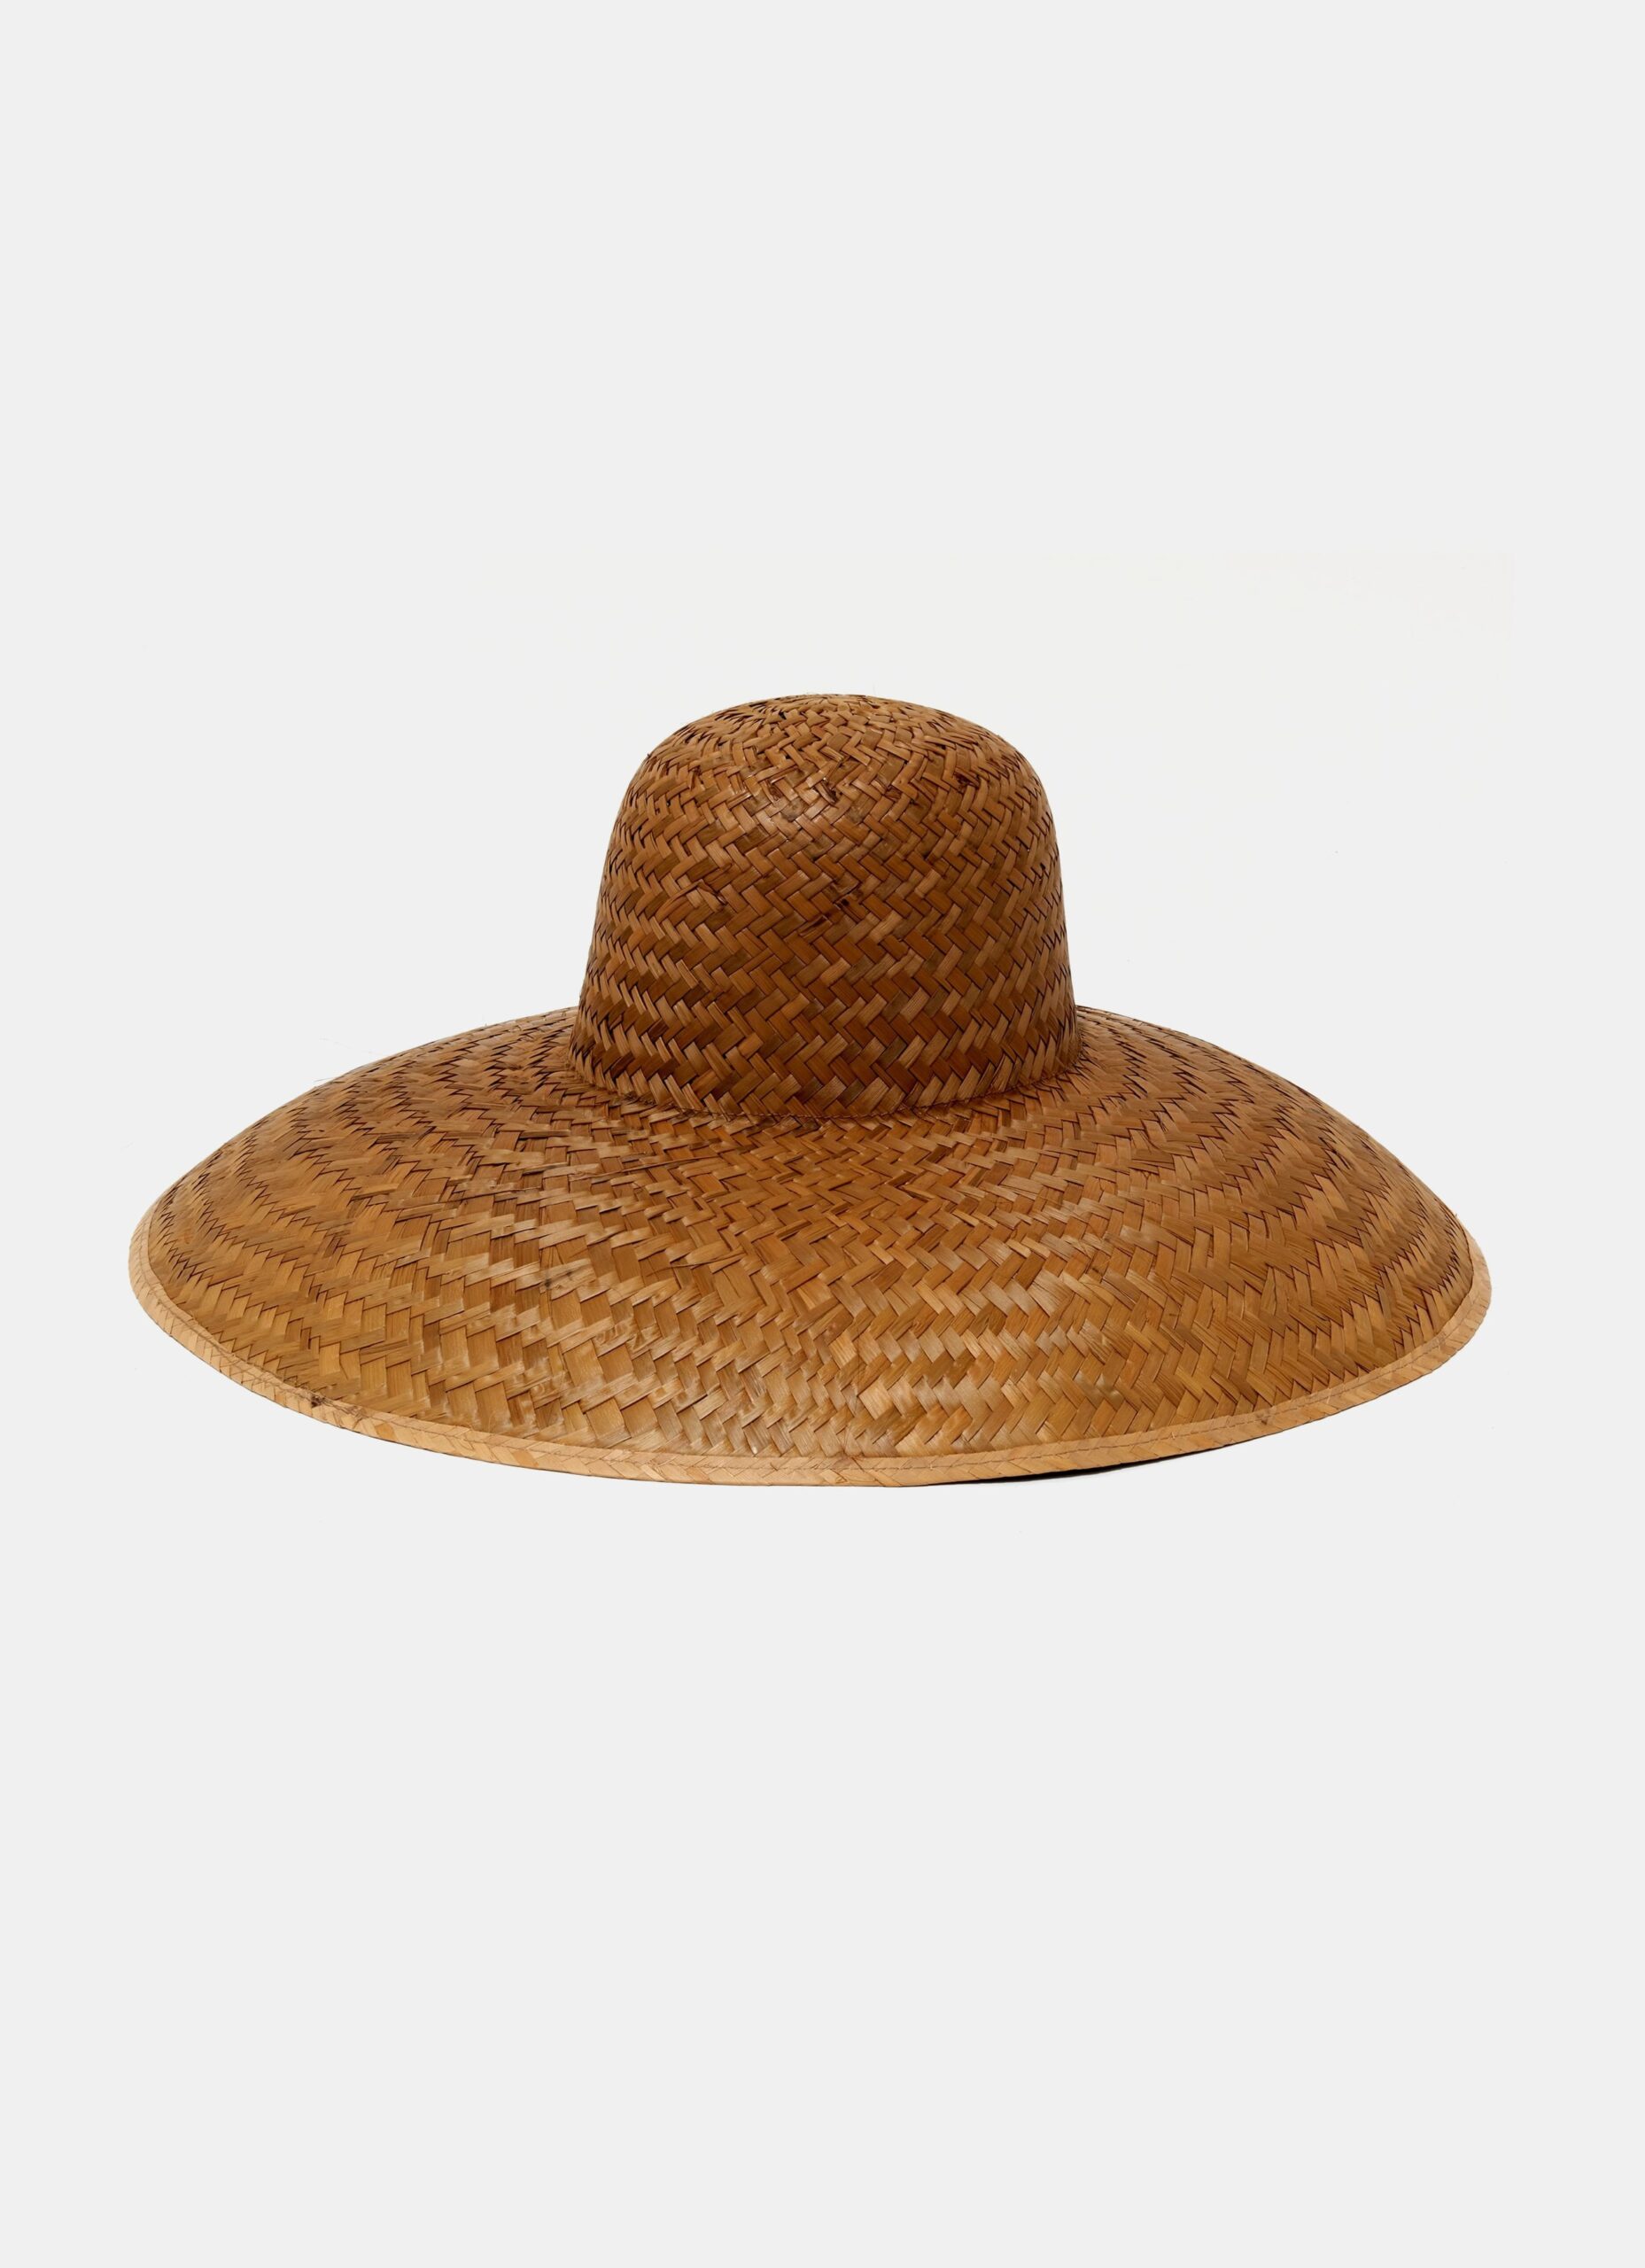 Communitie Marfa - Surfer Hat - Cooked Palm Straw